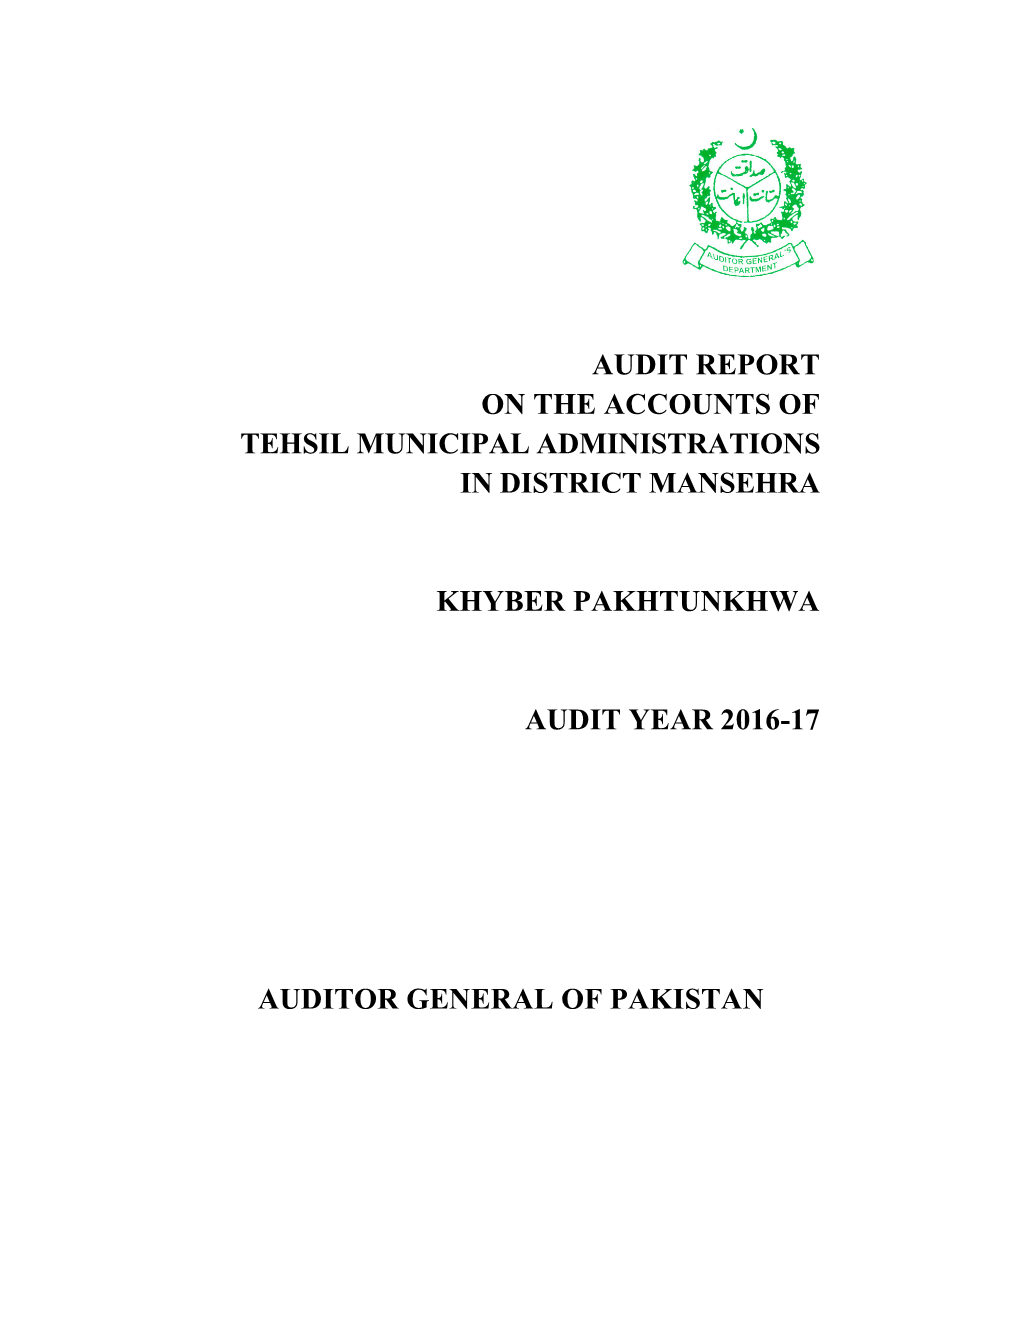 Audit Report on the Accounts of Tehsil Municipal Administrations in District Mansehra